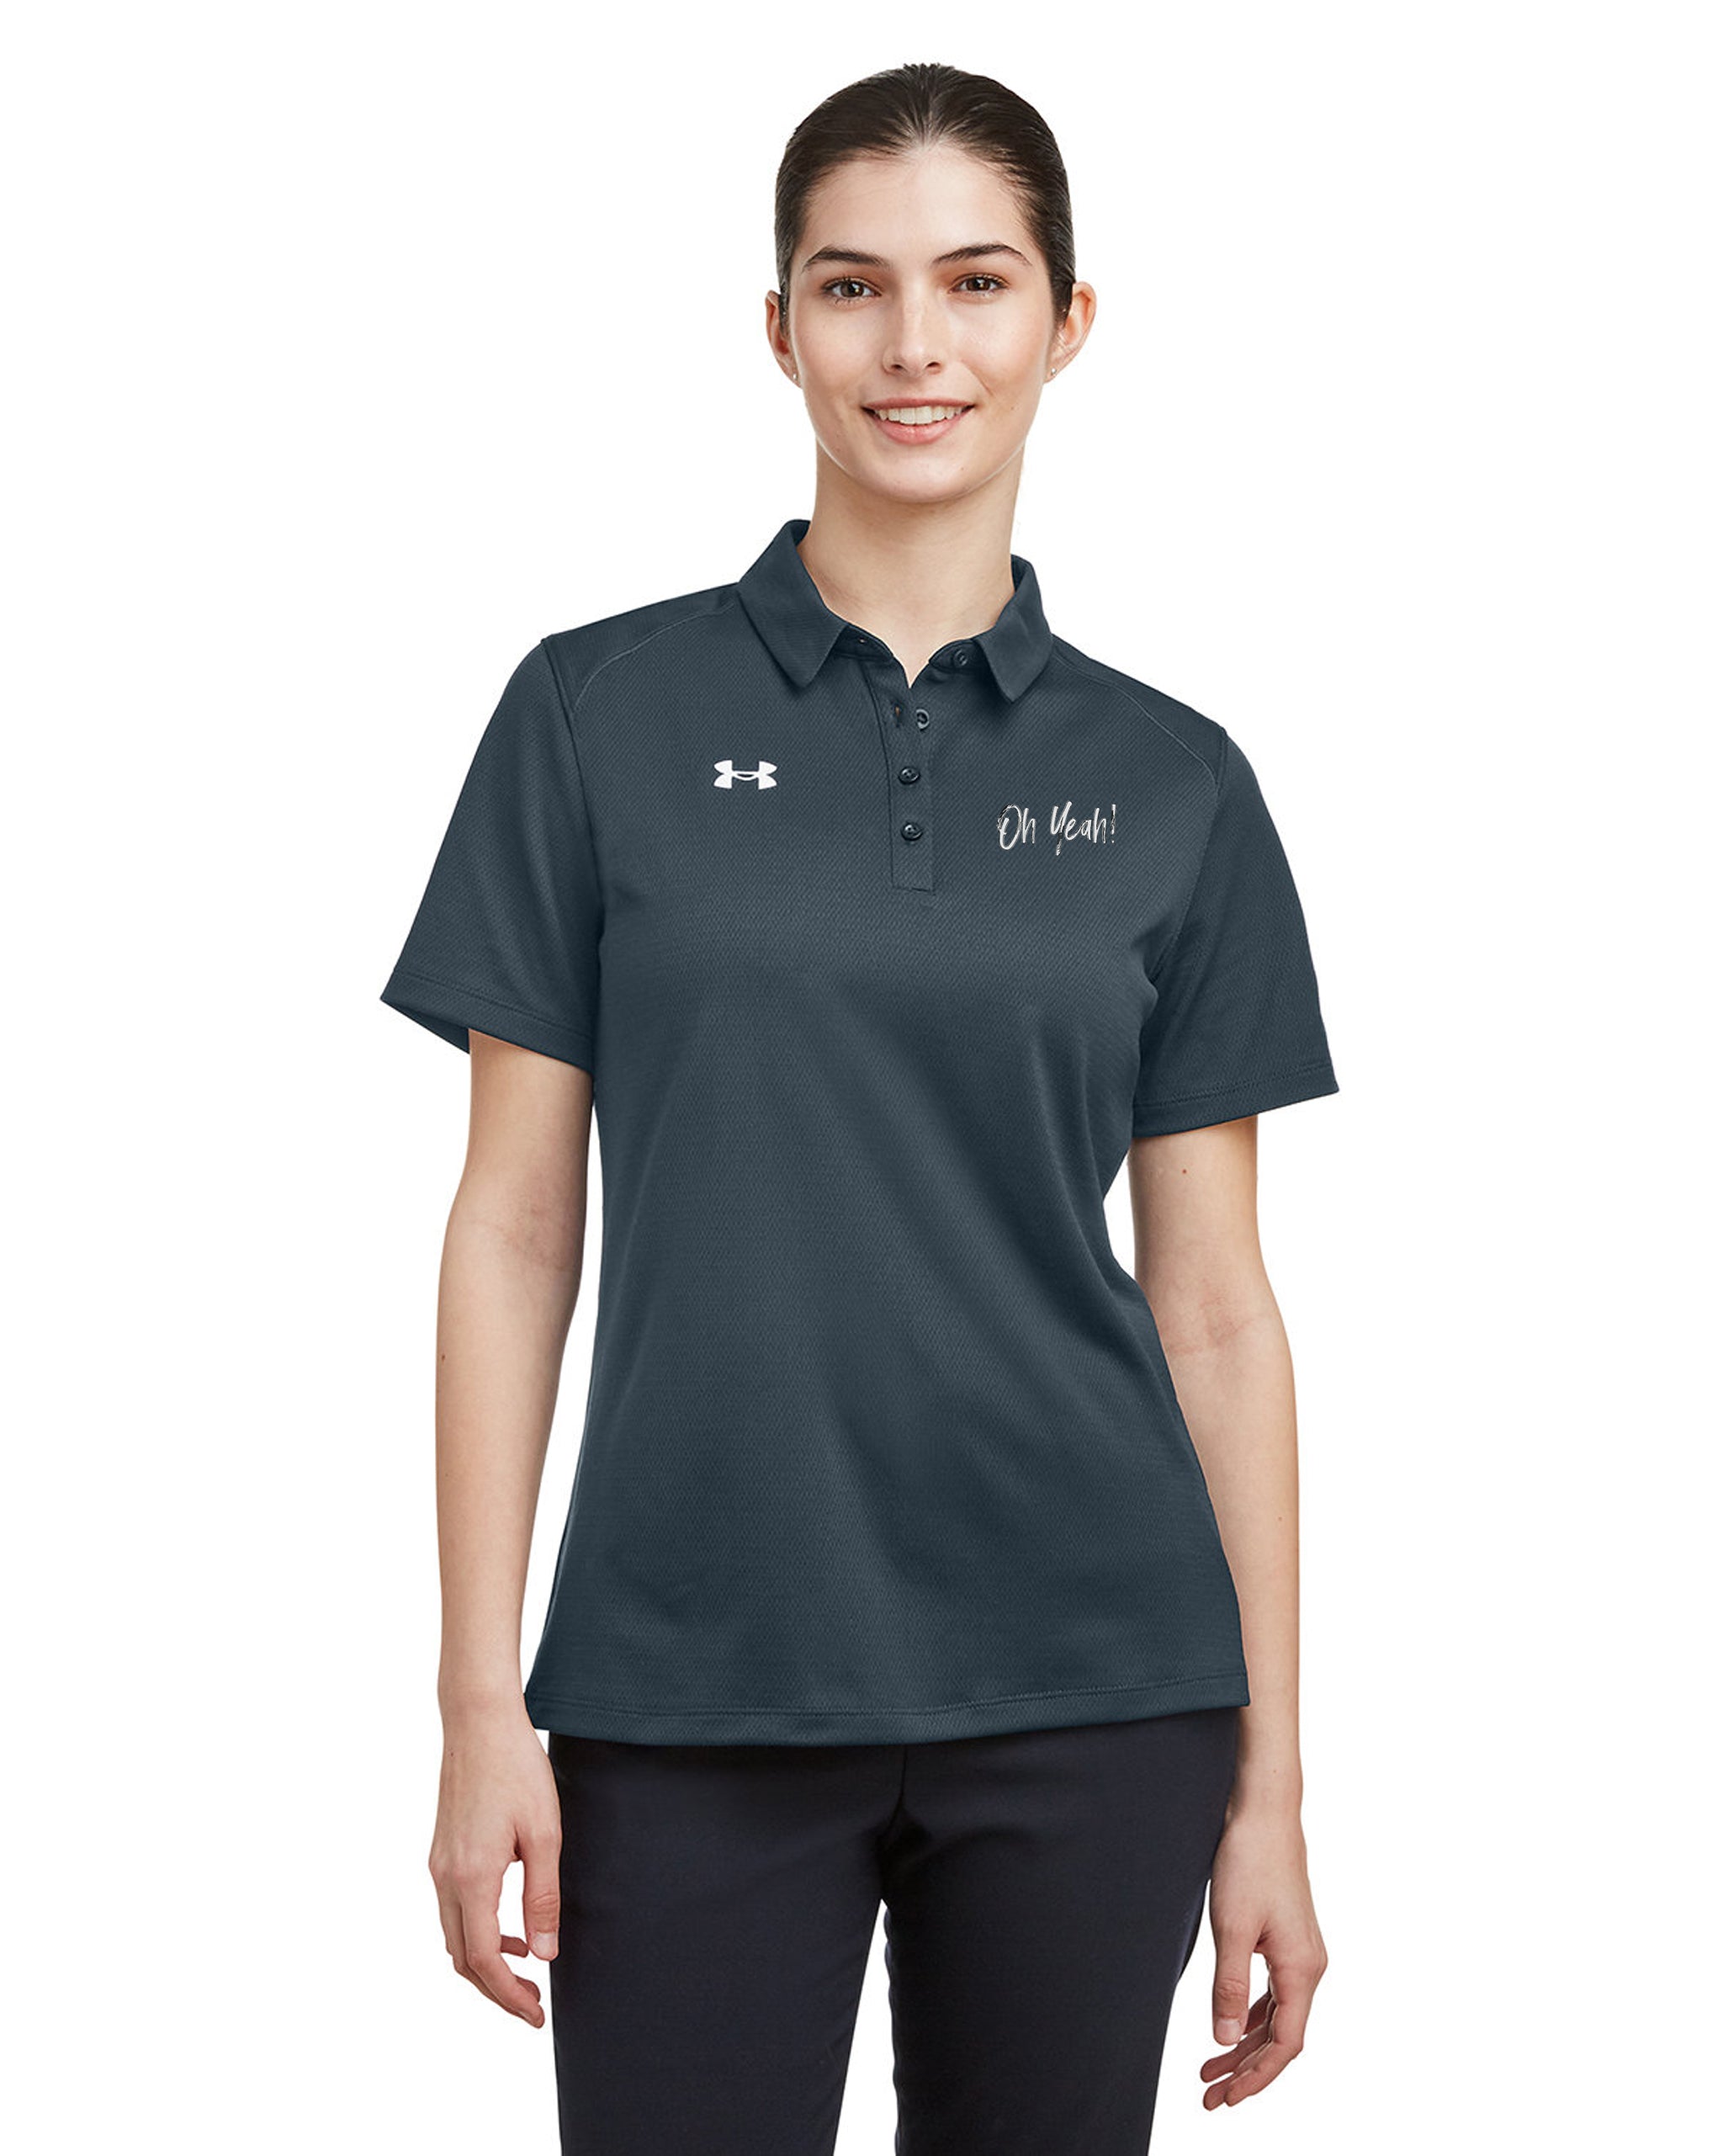 Oh Yeah - Under Armour Ladies' Tech Polo - 1370431